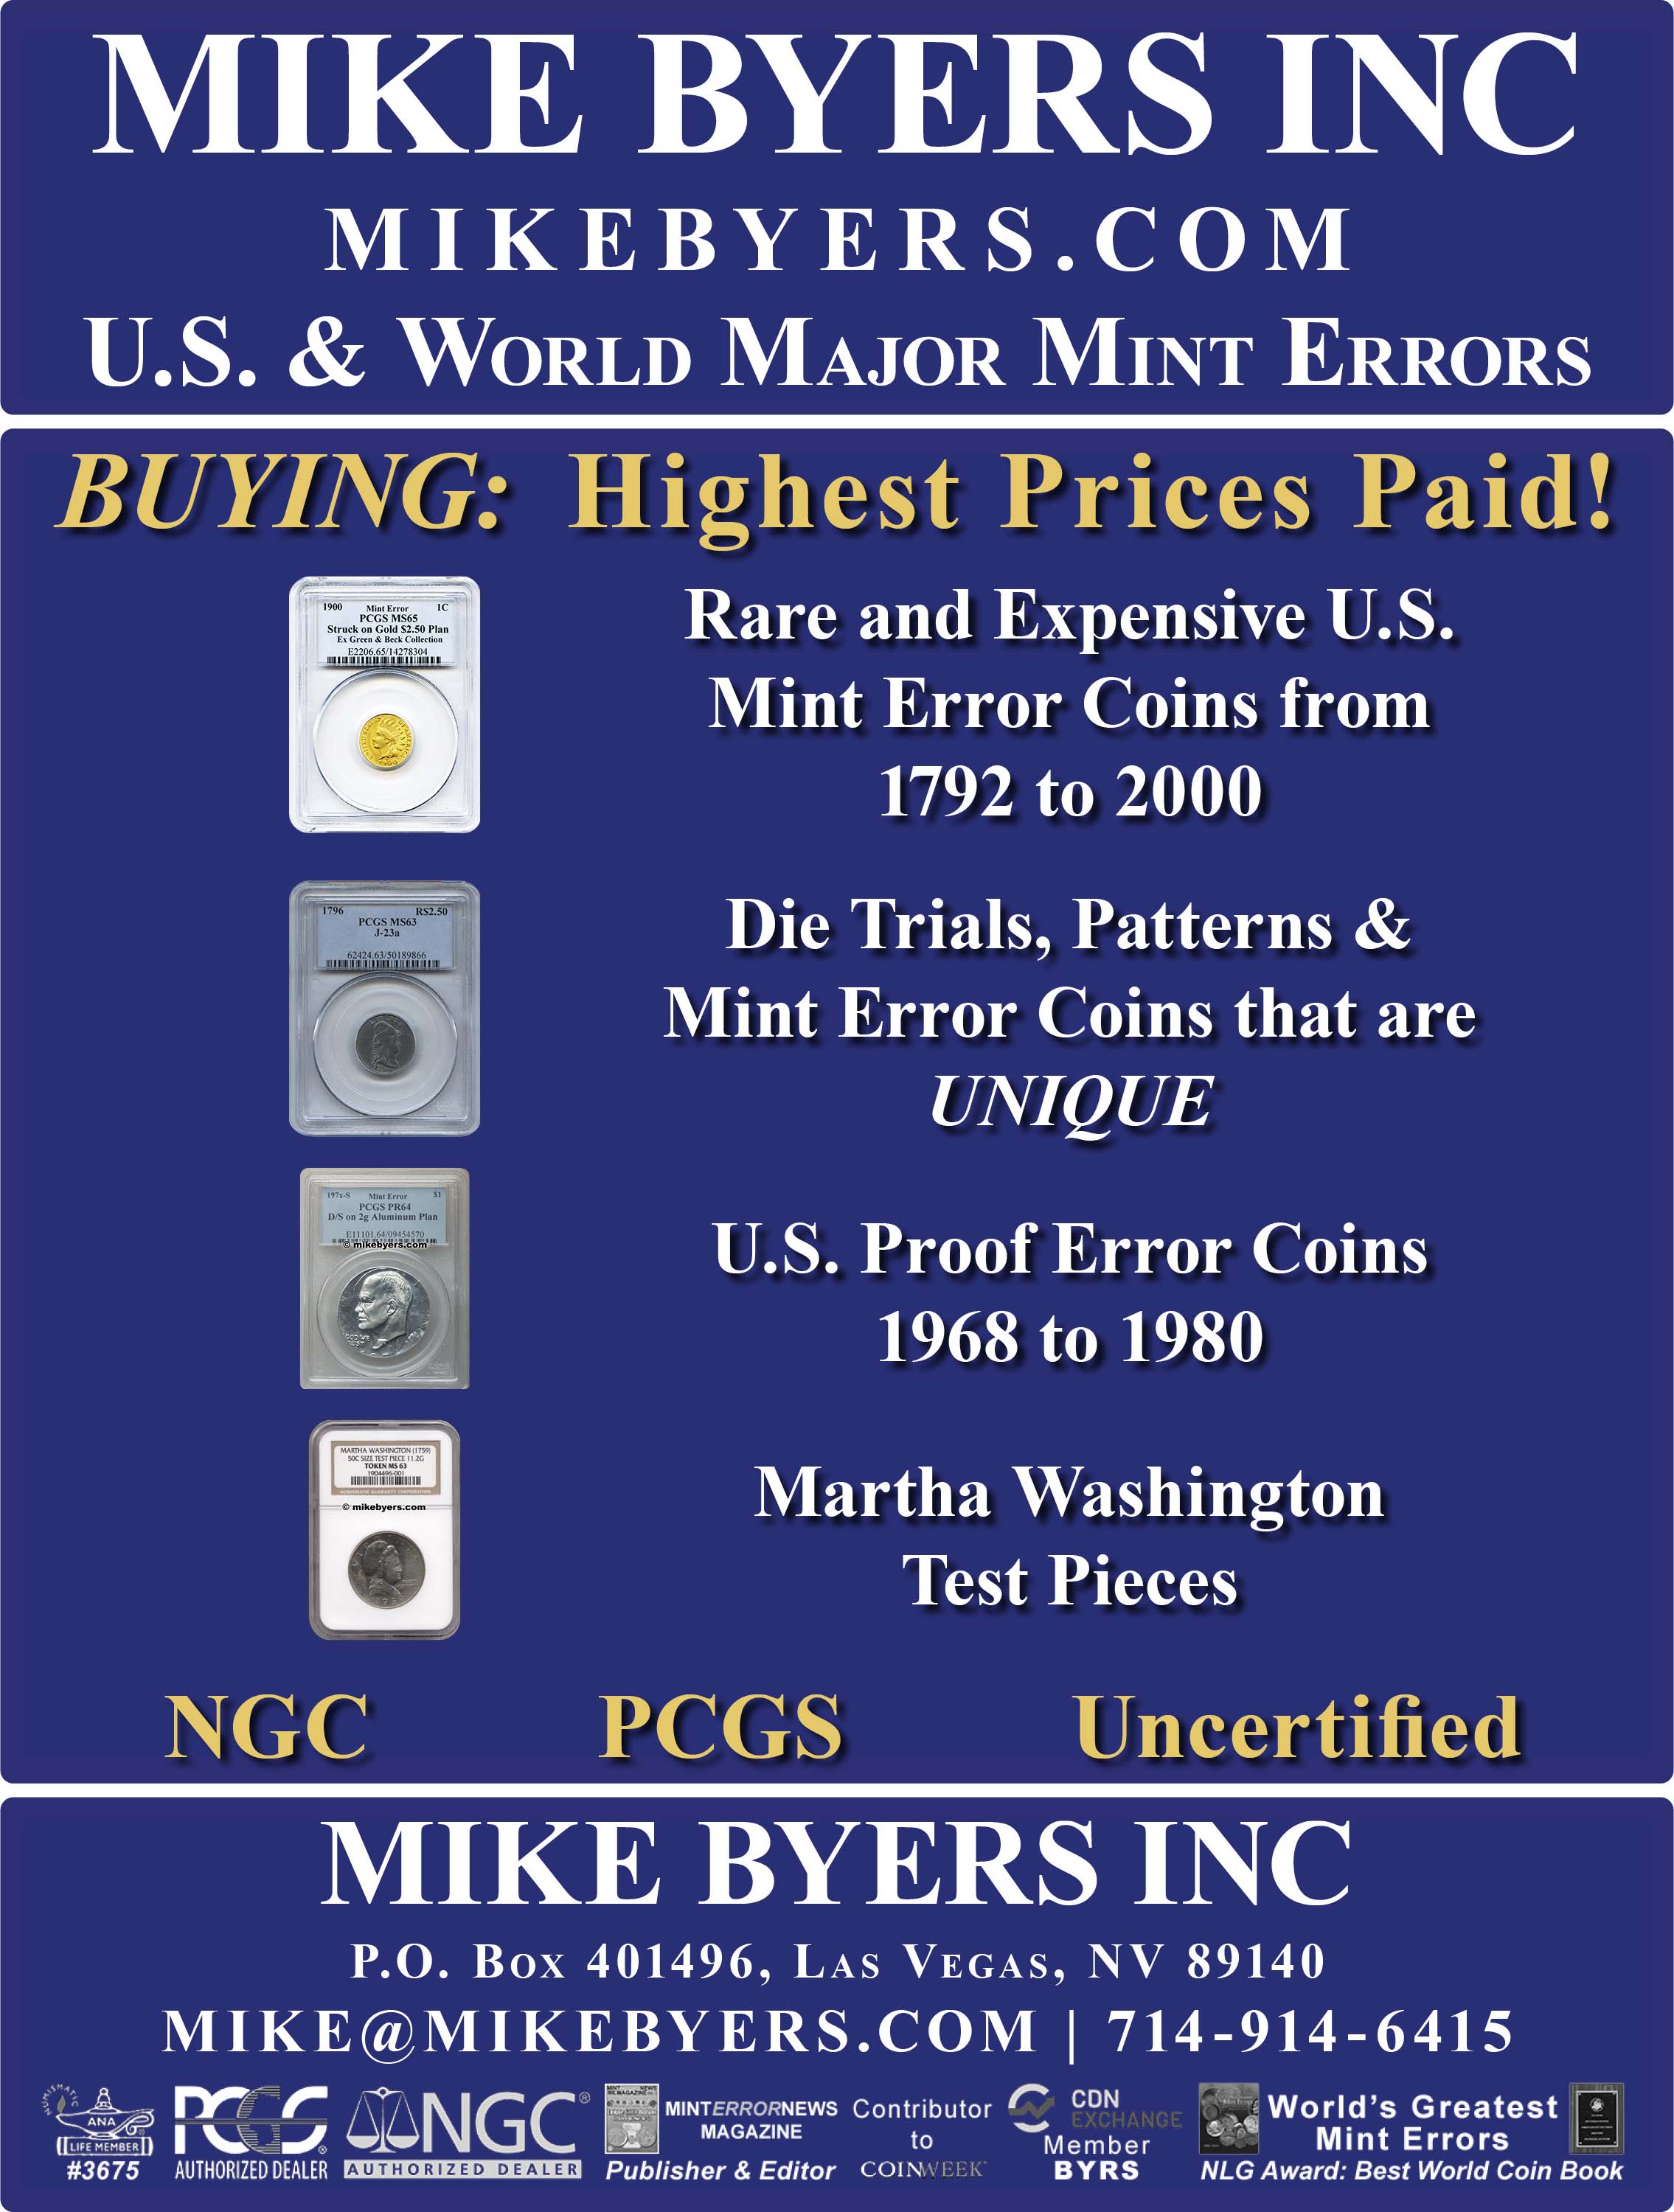 Mike Byers Inc